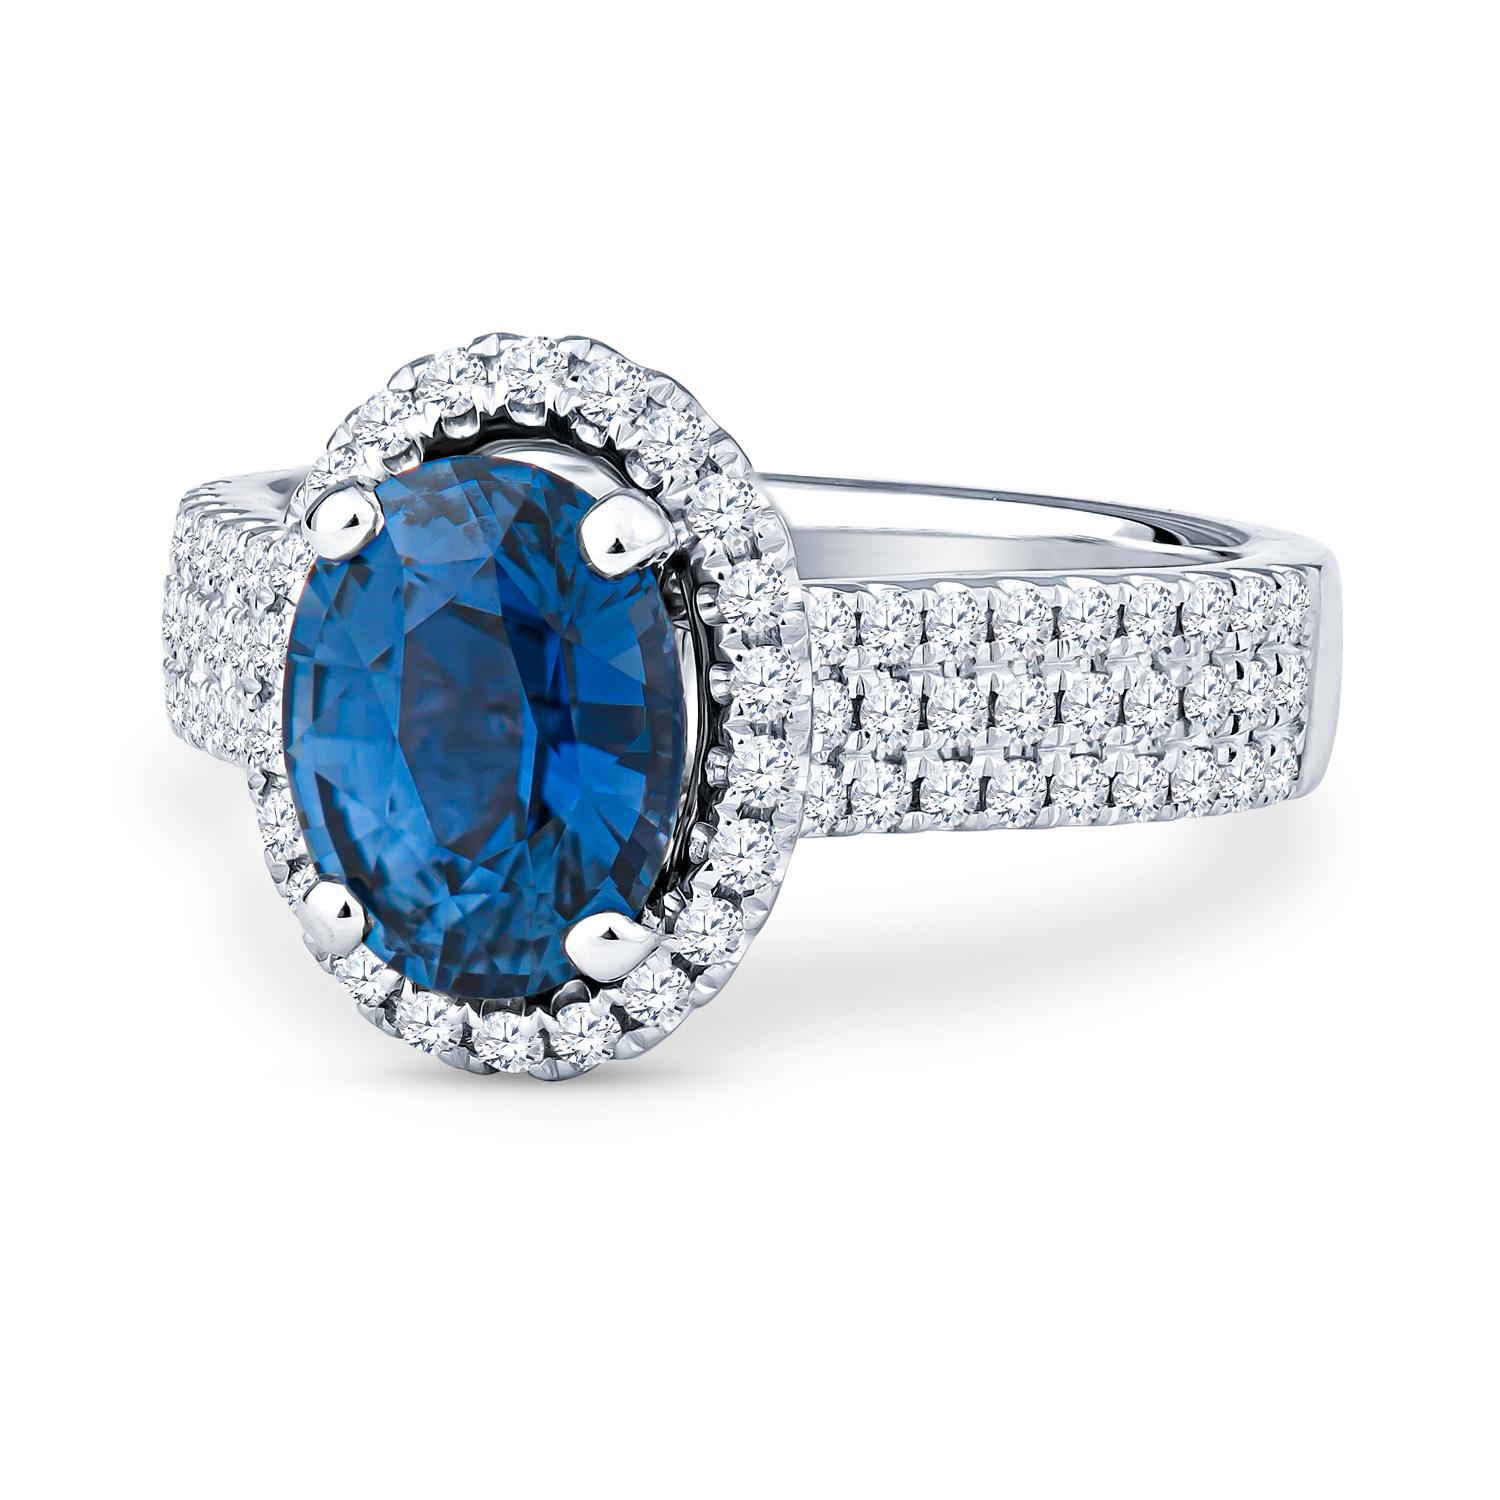 This gorgeous 2.28ct oval cut natural, beautifully saturated blue sapphire (GIA  2205618697) is surrounded by pave-set round diamonds with a 0.50ct total weight. These stones are set in a size 6 platinum oval halo ring, but can be resized upon